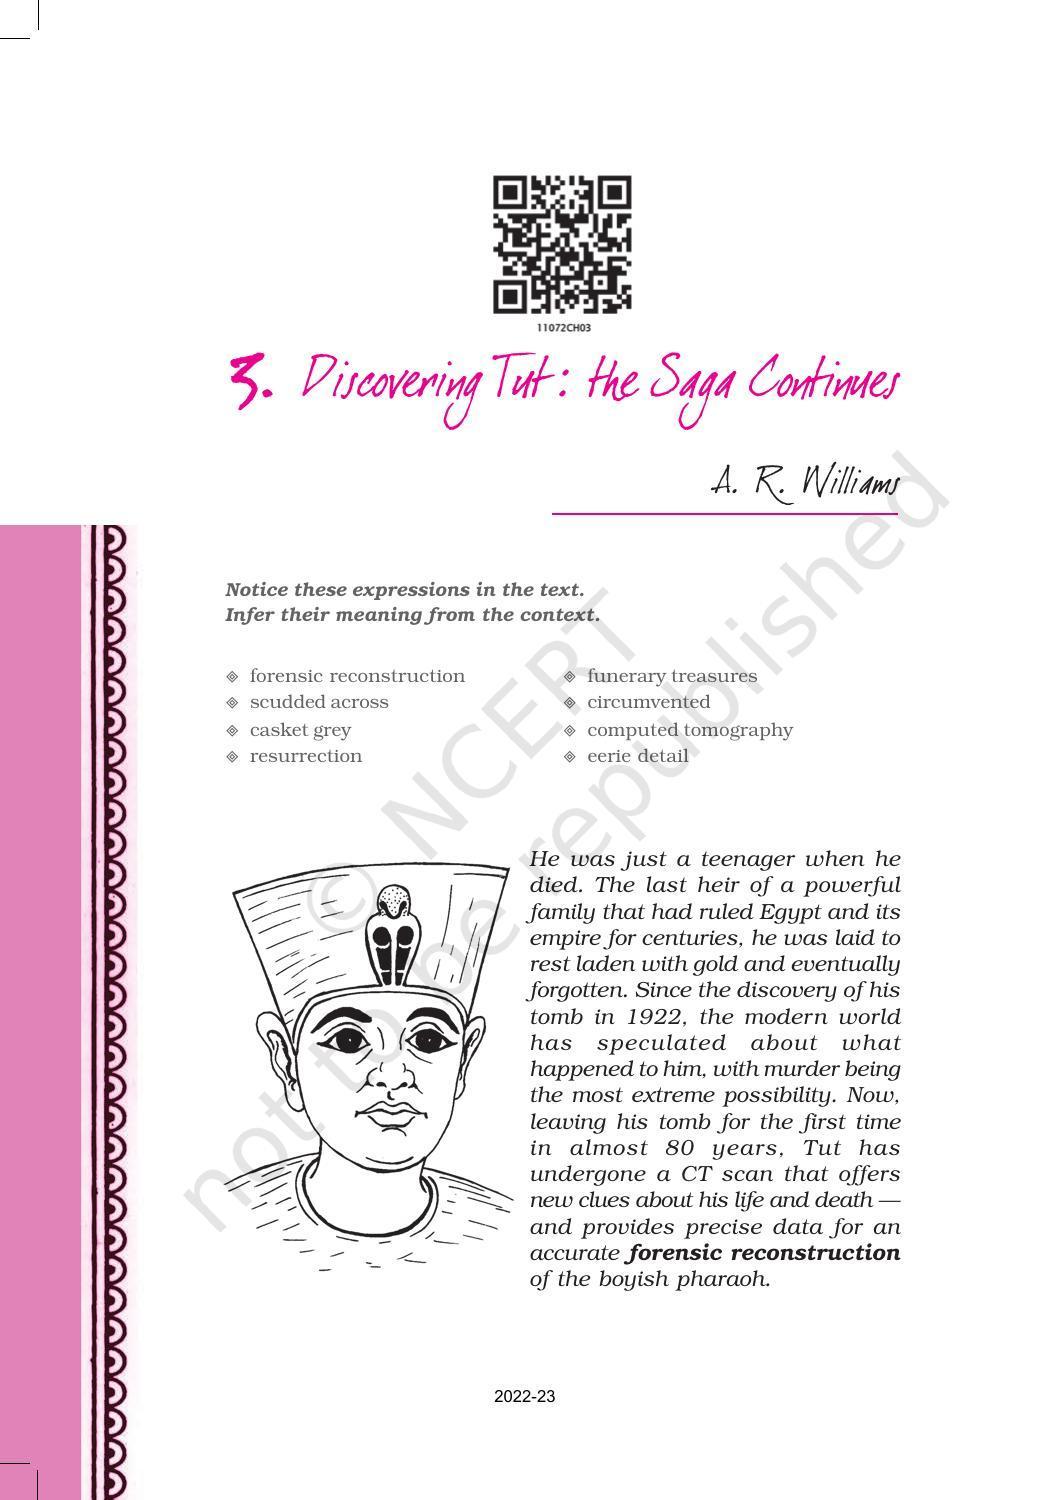 NCERT Book for Class 11 English Hornbill Chapter 3 Discovering Tut: The Saga Continues - Page 1